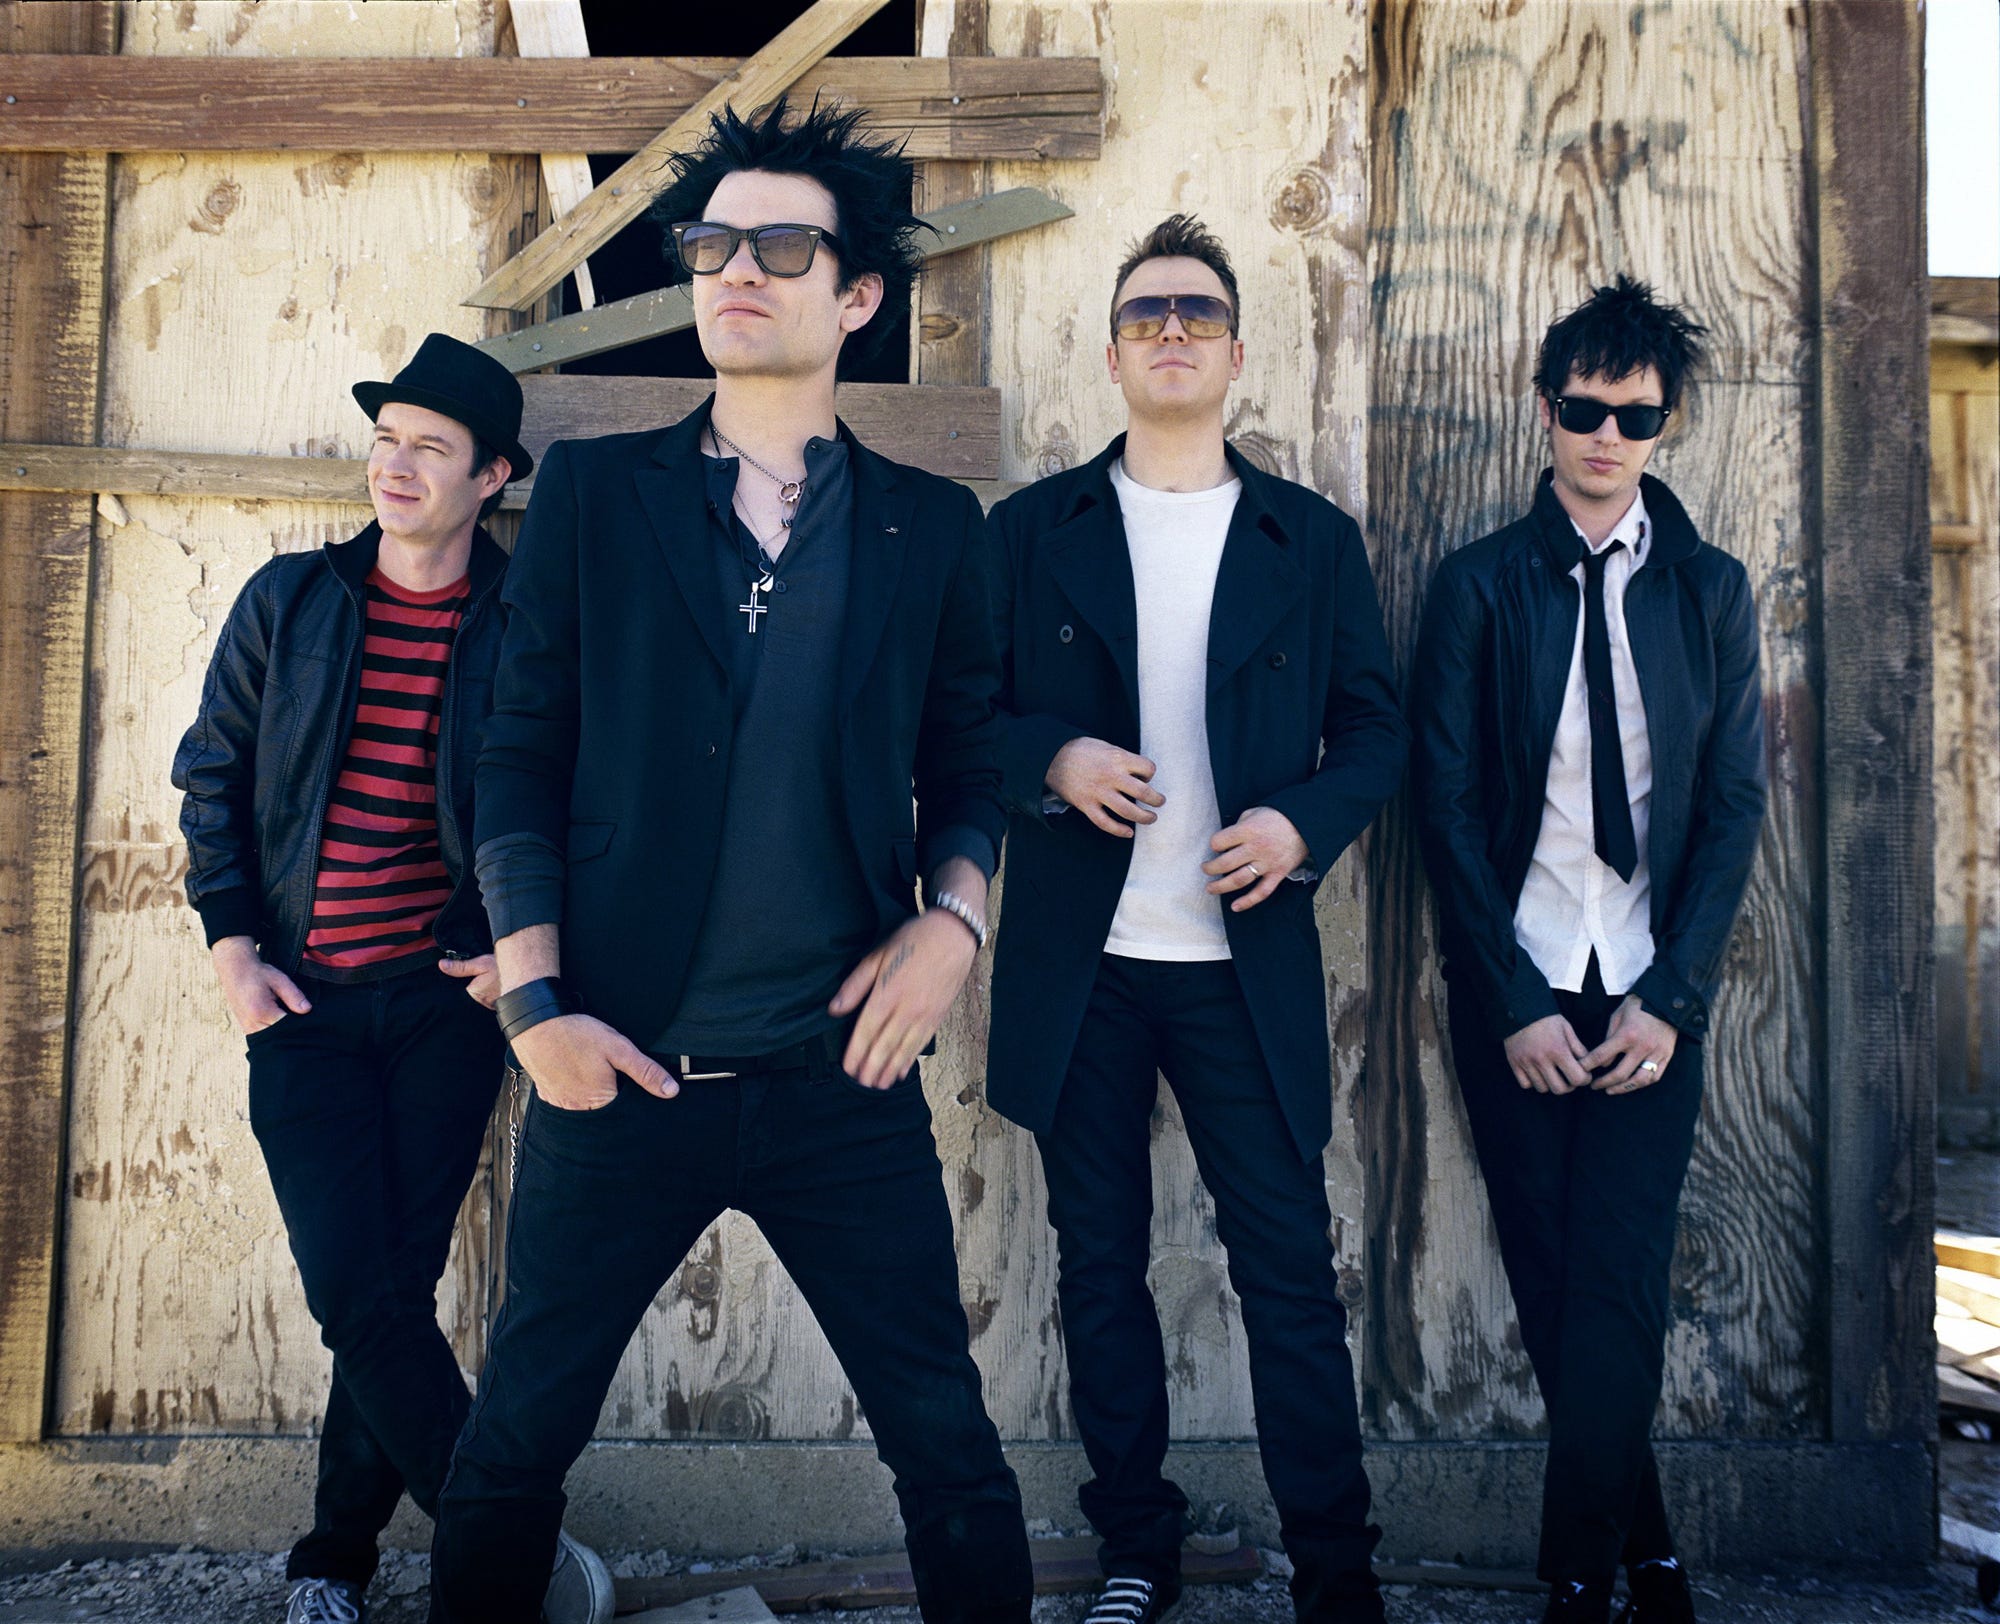 Sum 41's Deryck Whibley on Hitting Rock Bottom and Staying Sober